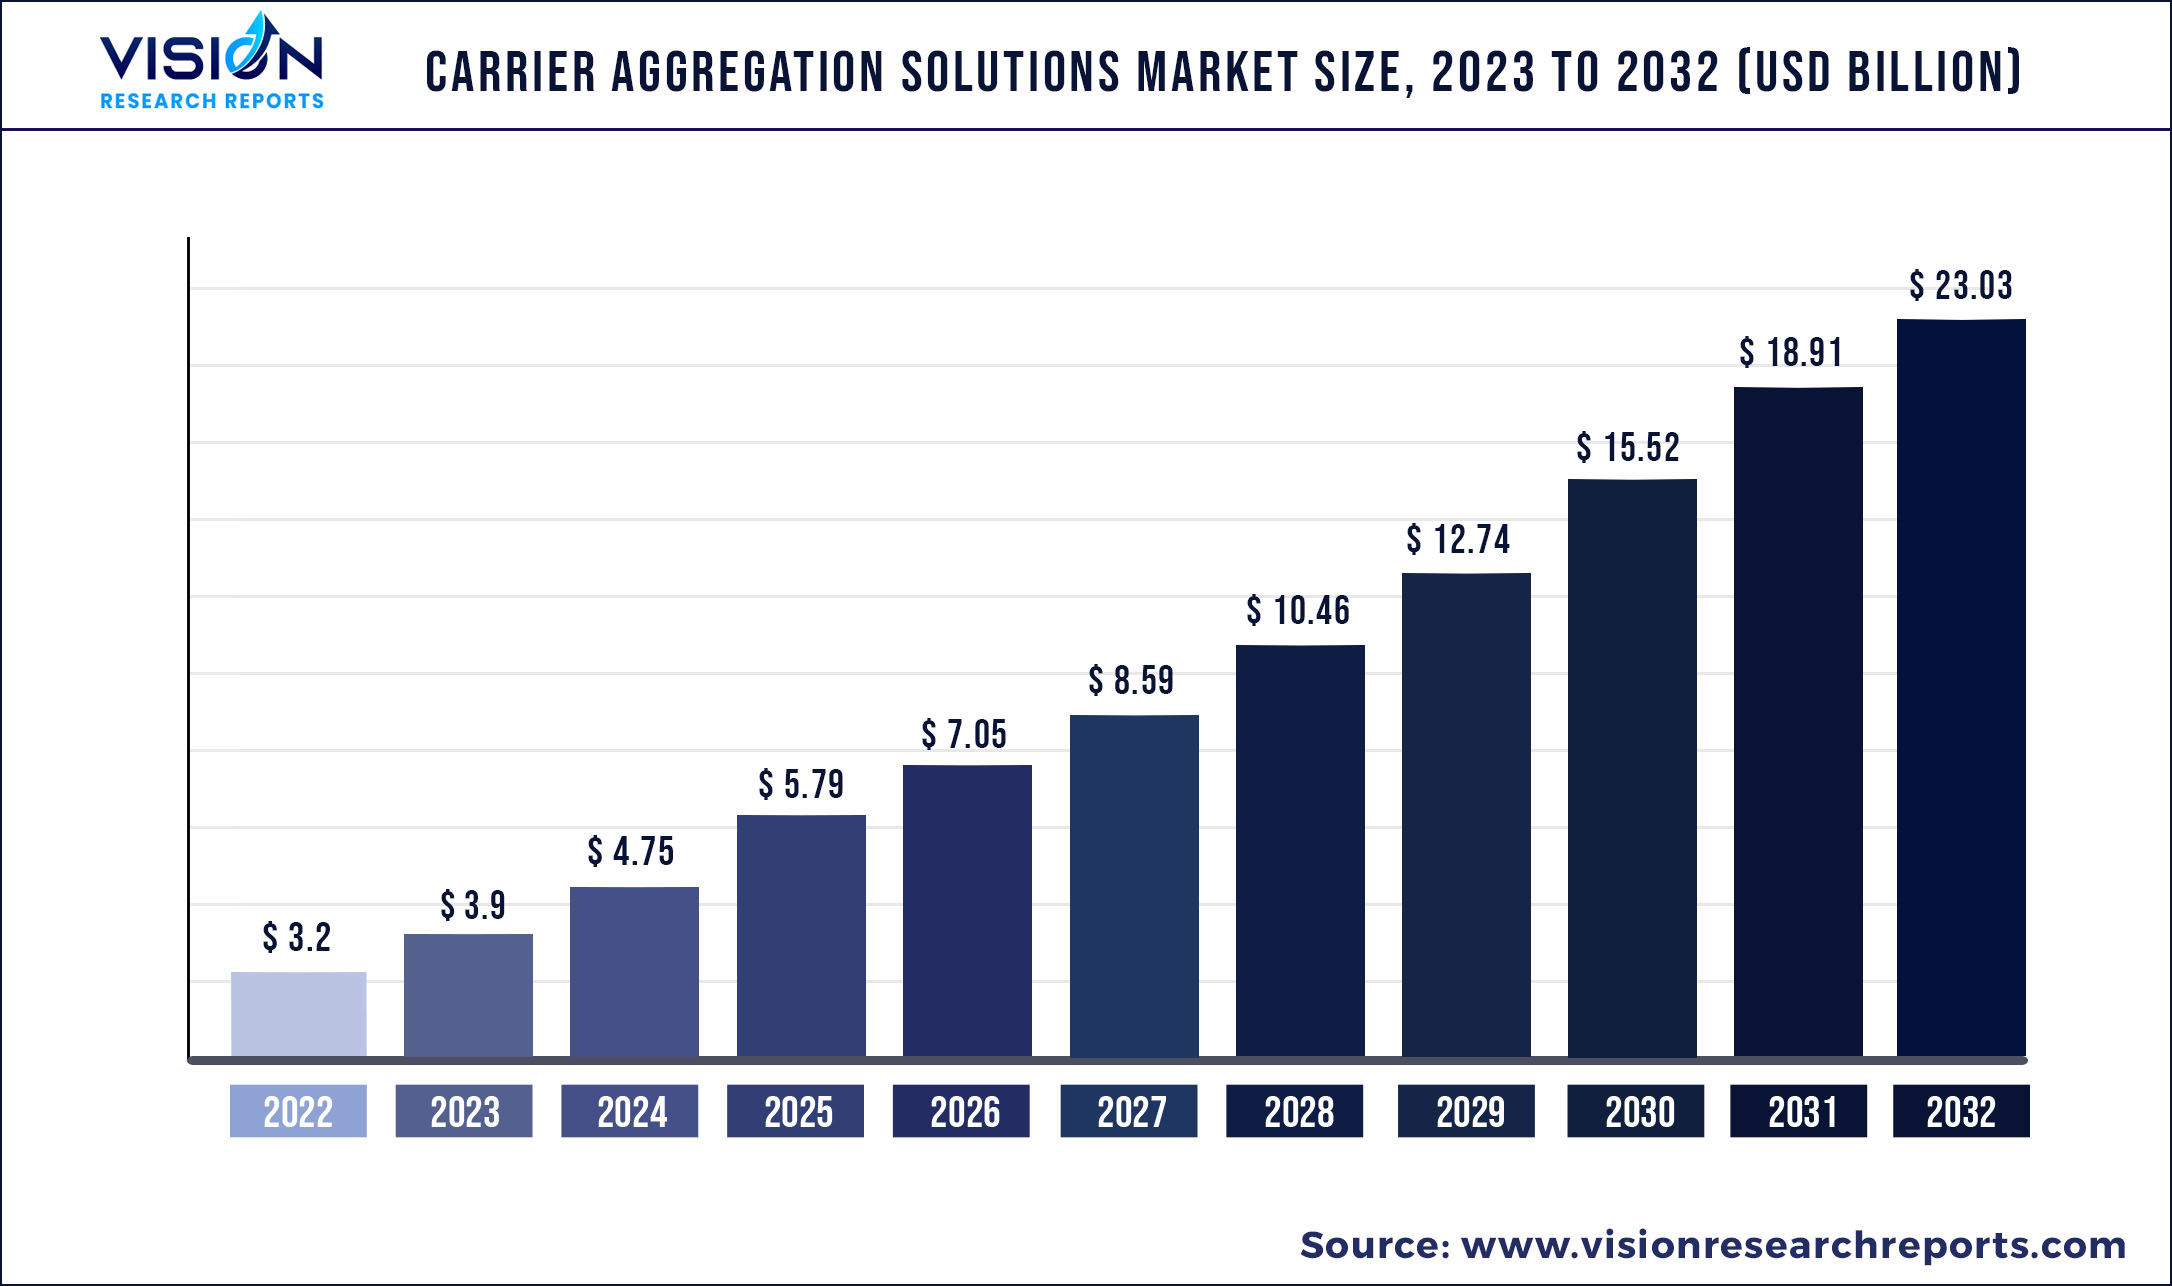 Carrier Aggregation Solutions Market Size 2023 to 2032